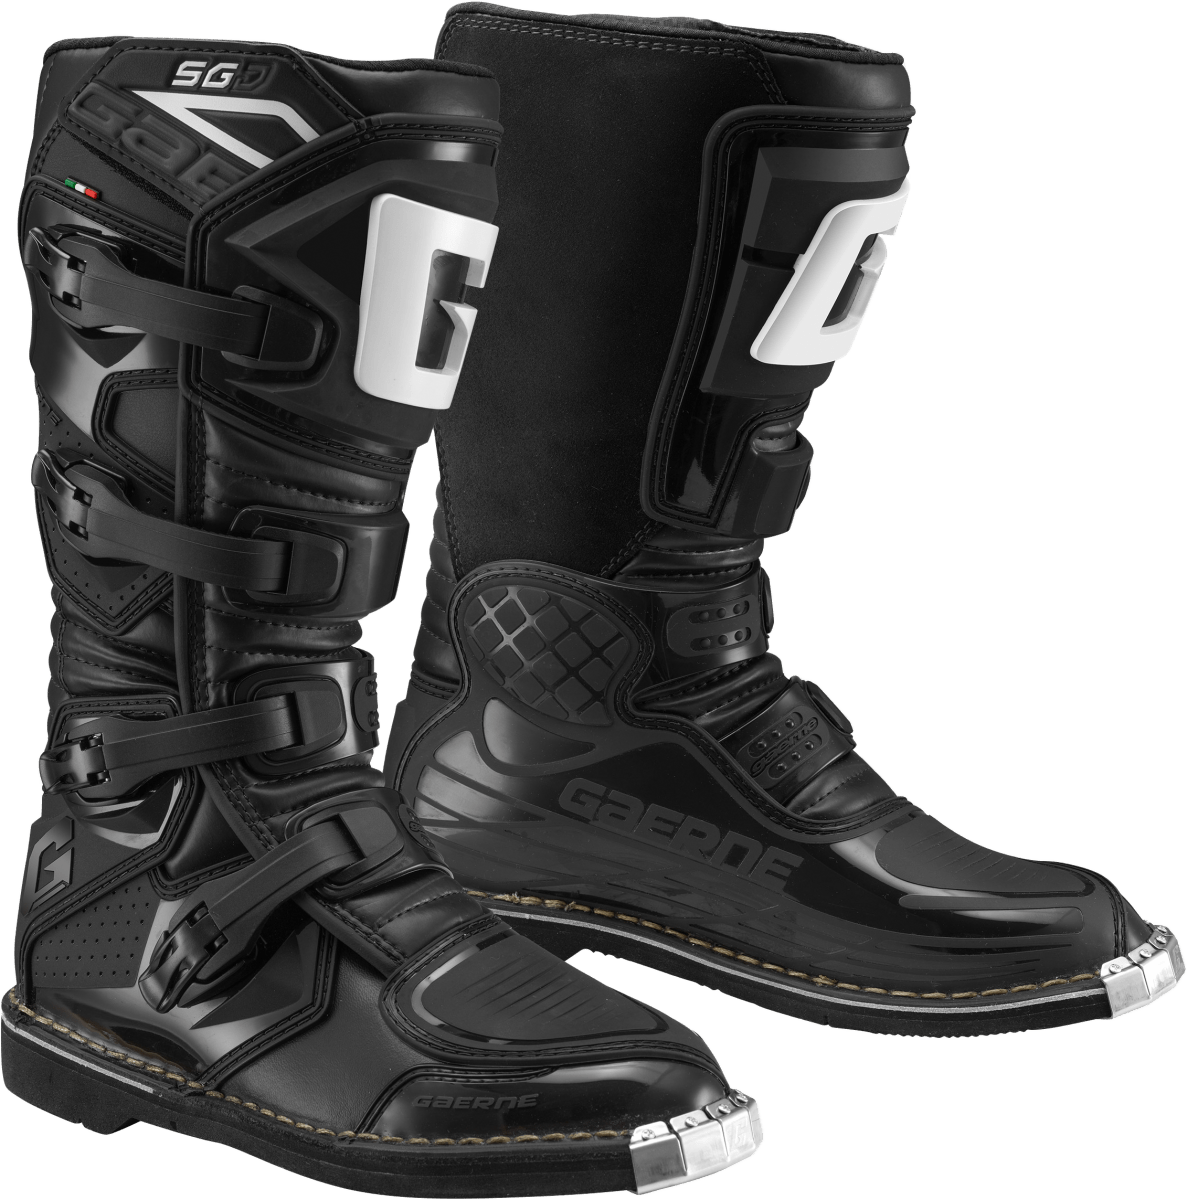 GAERNE - YOUTH SG-J BOOTS - 480-09401 - 2000000247458